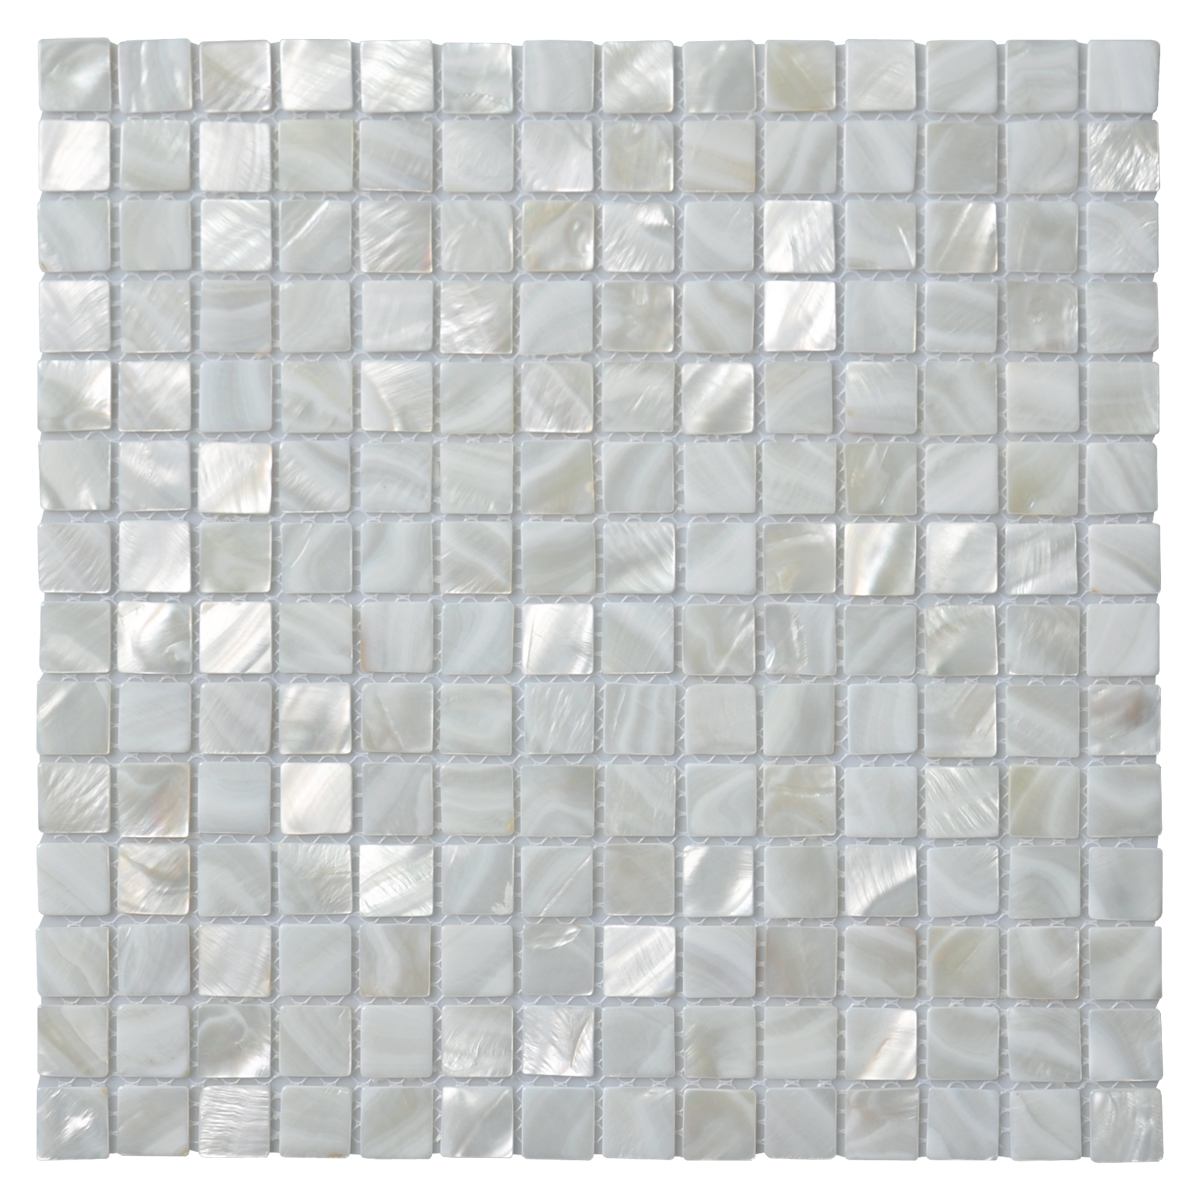 A18010 - Art3d Oyster Mother of Pearl Square Shell Mosaic for Kitchen Backsplashes, Bathroom Walls, Spa Tile, Pool Tile